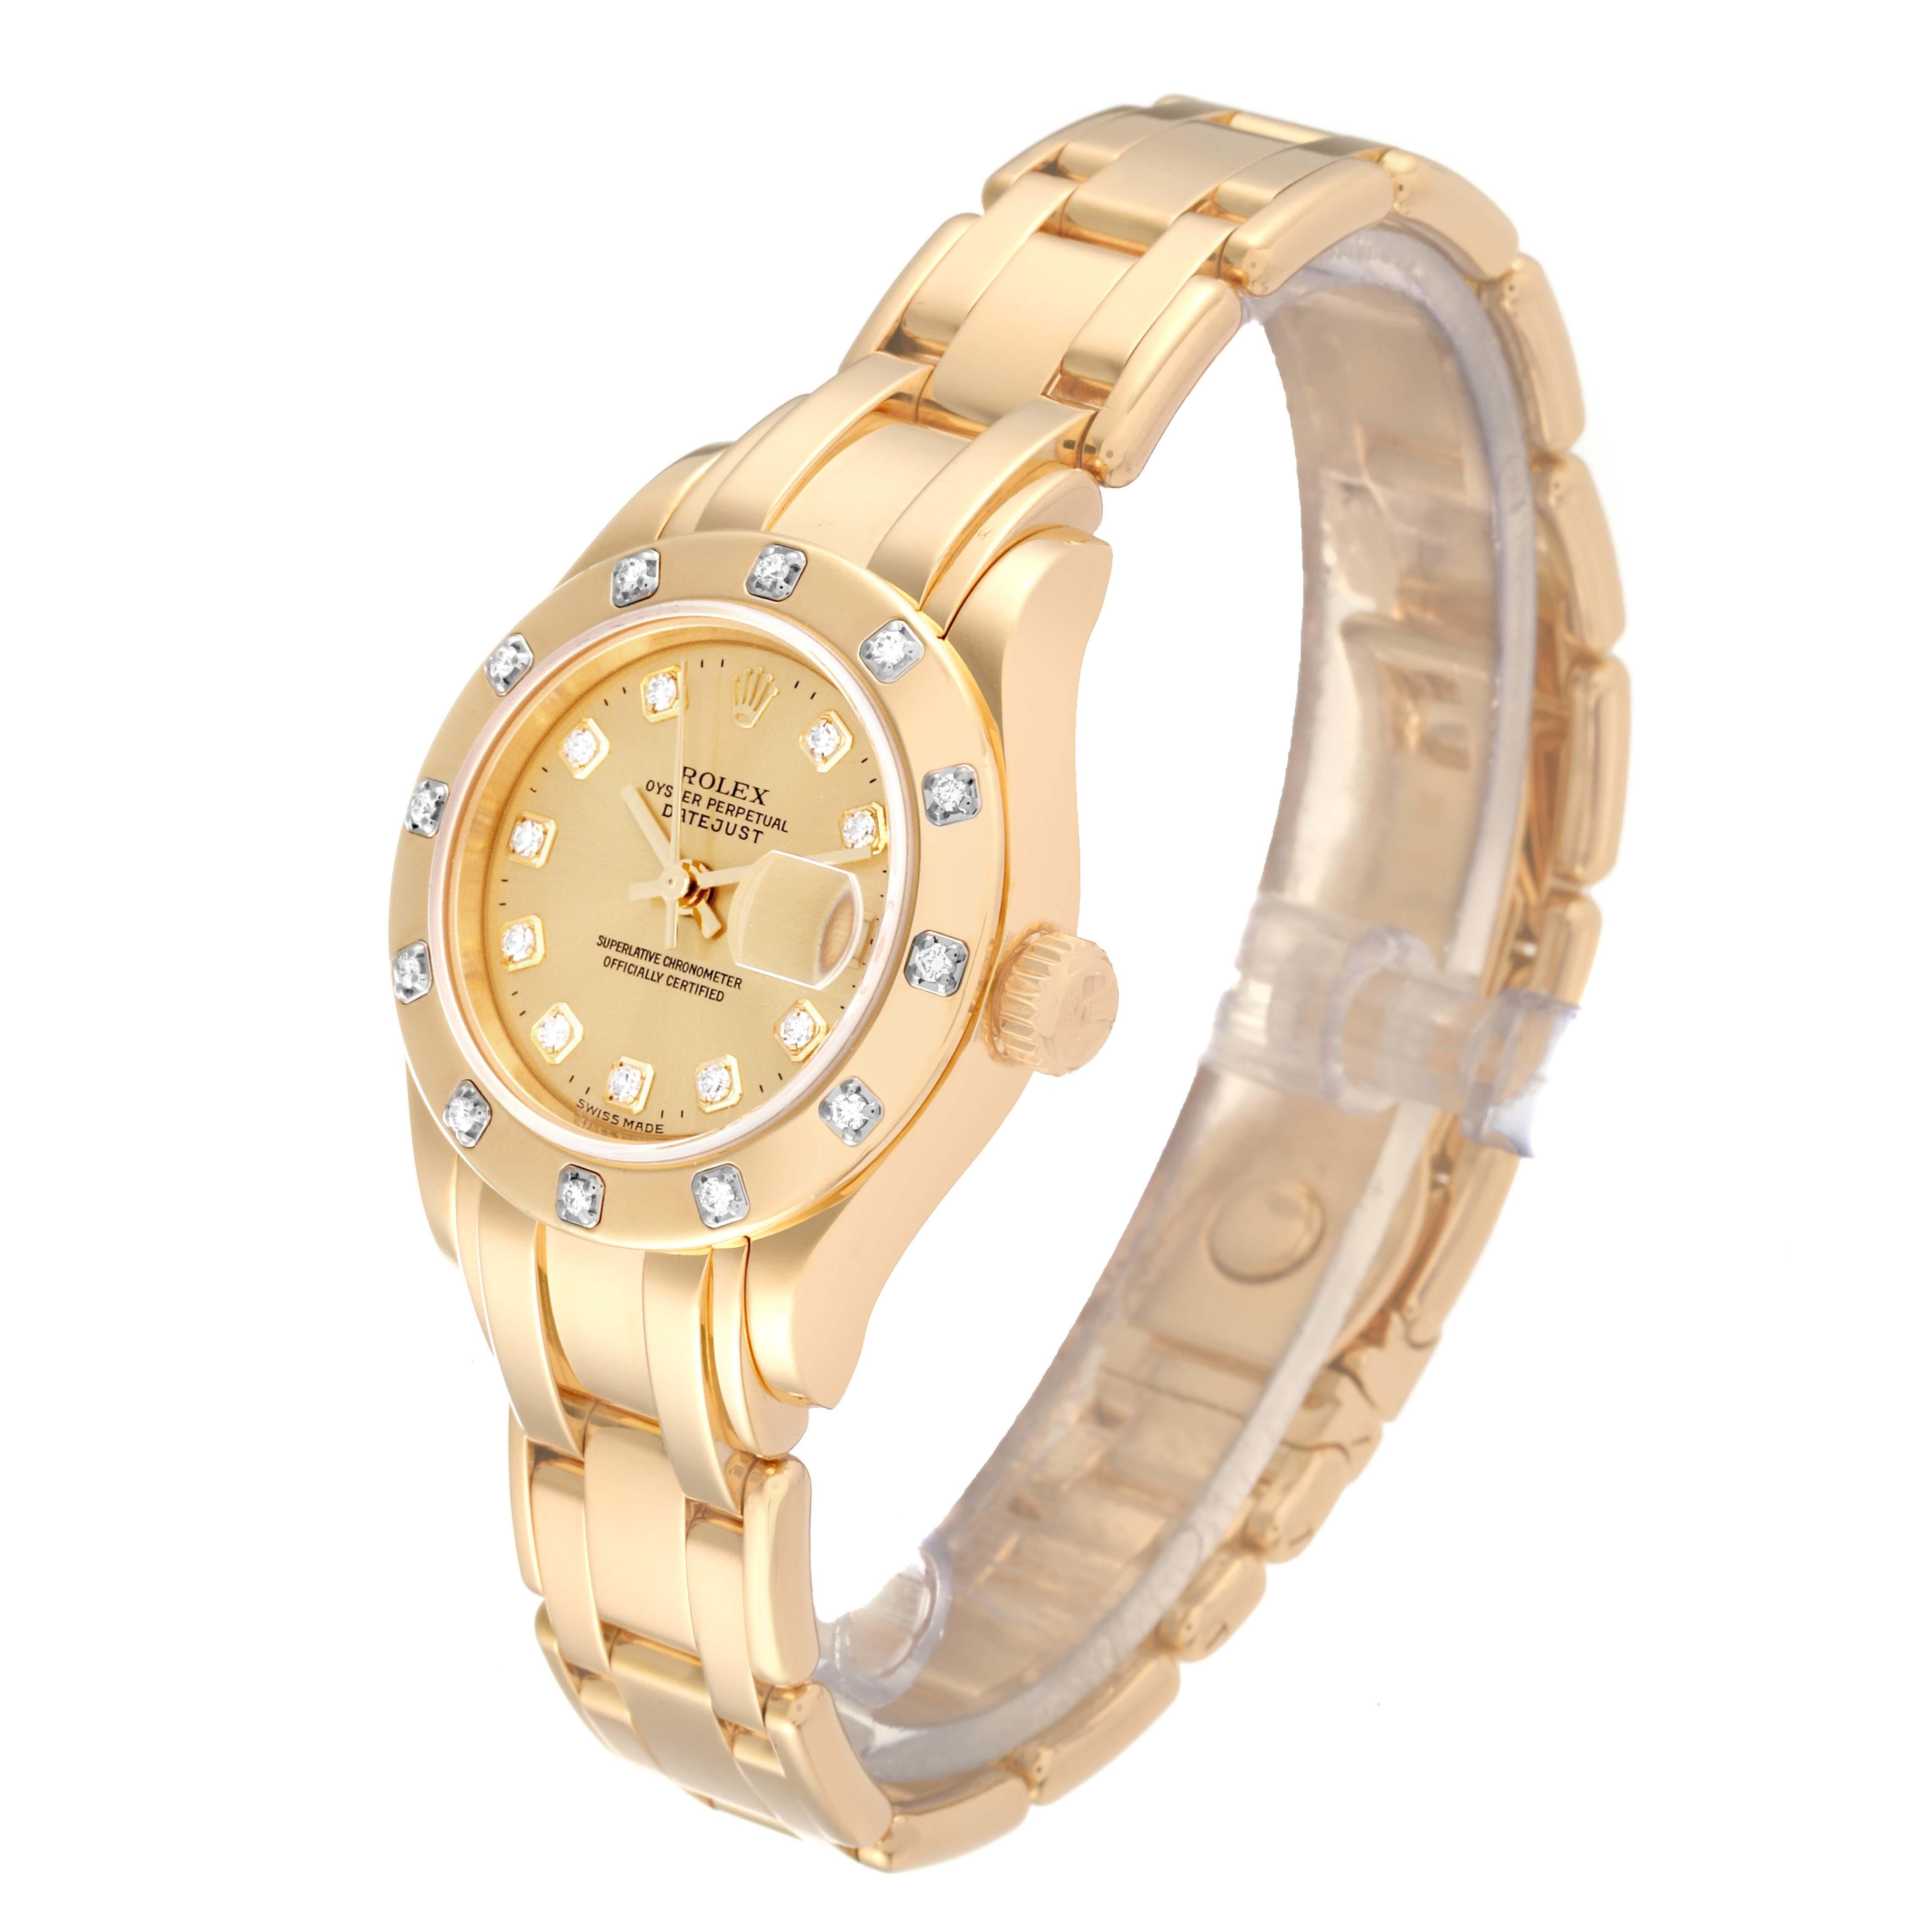 Rolex Pearlmaster 18K Yellow Gold Diamond Champagne Dial Ladies Watch 80318 For Sale 5